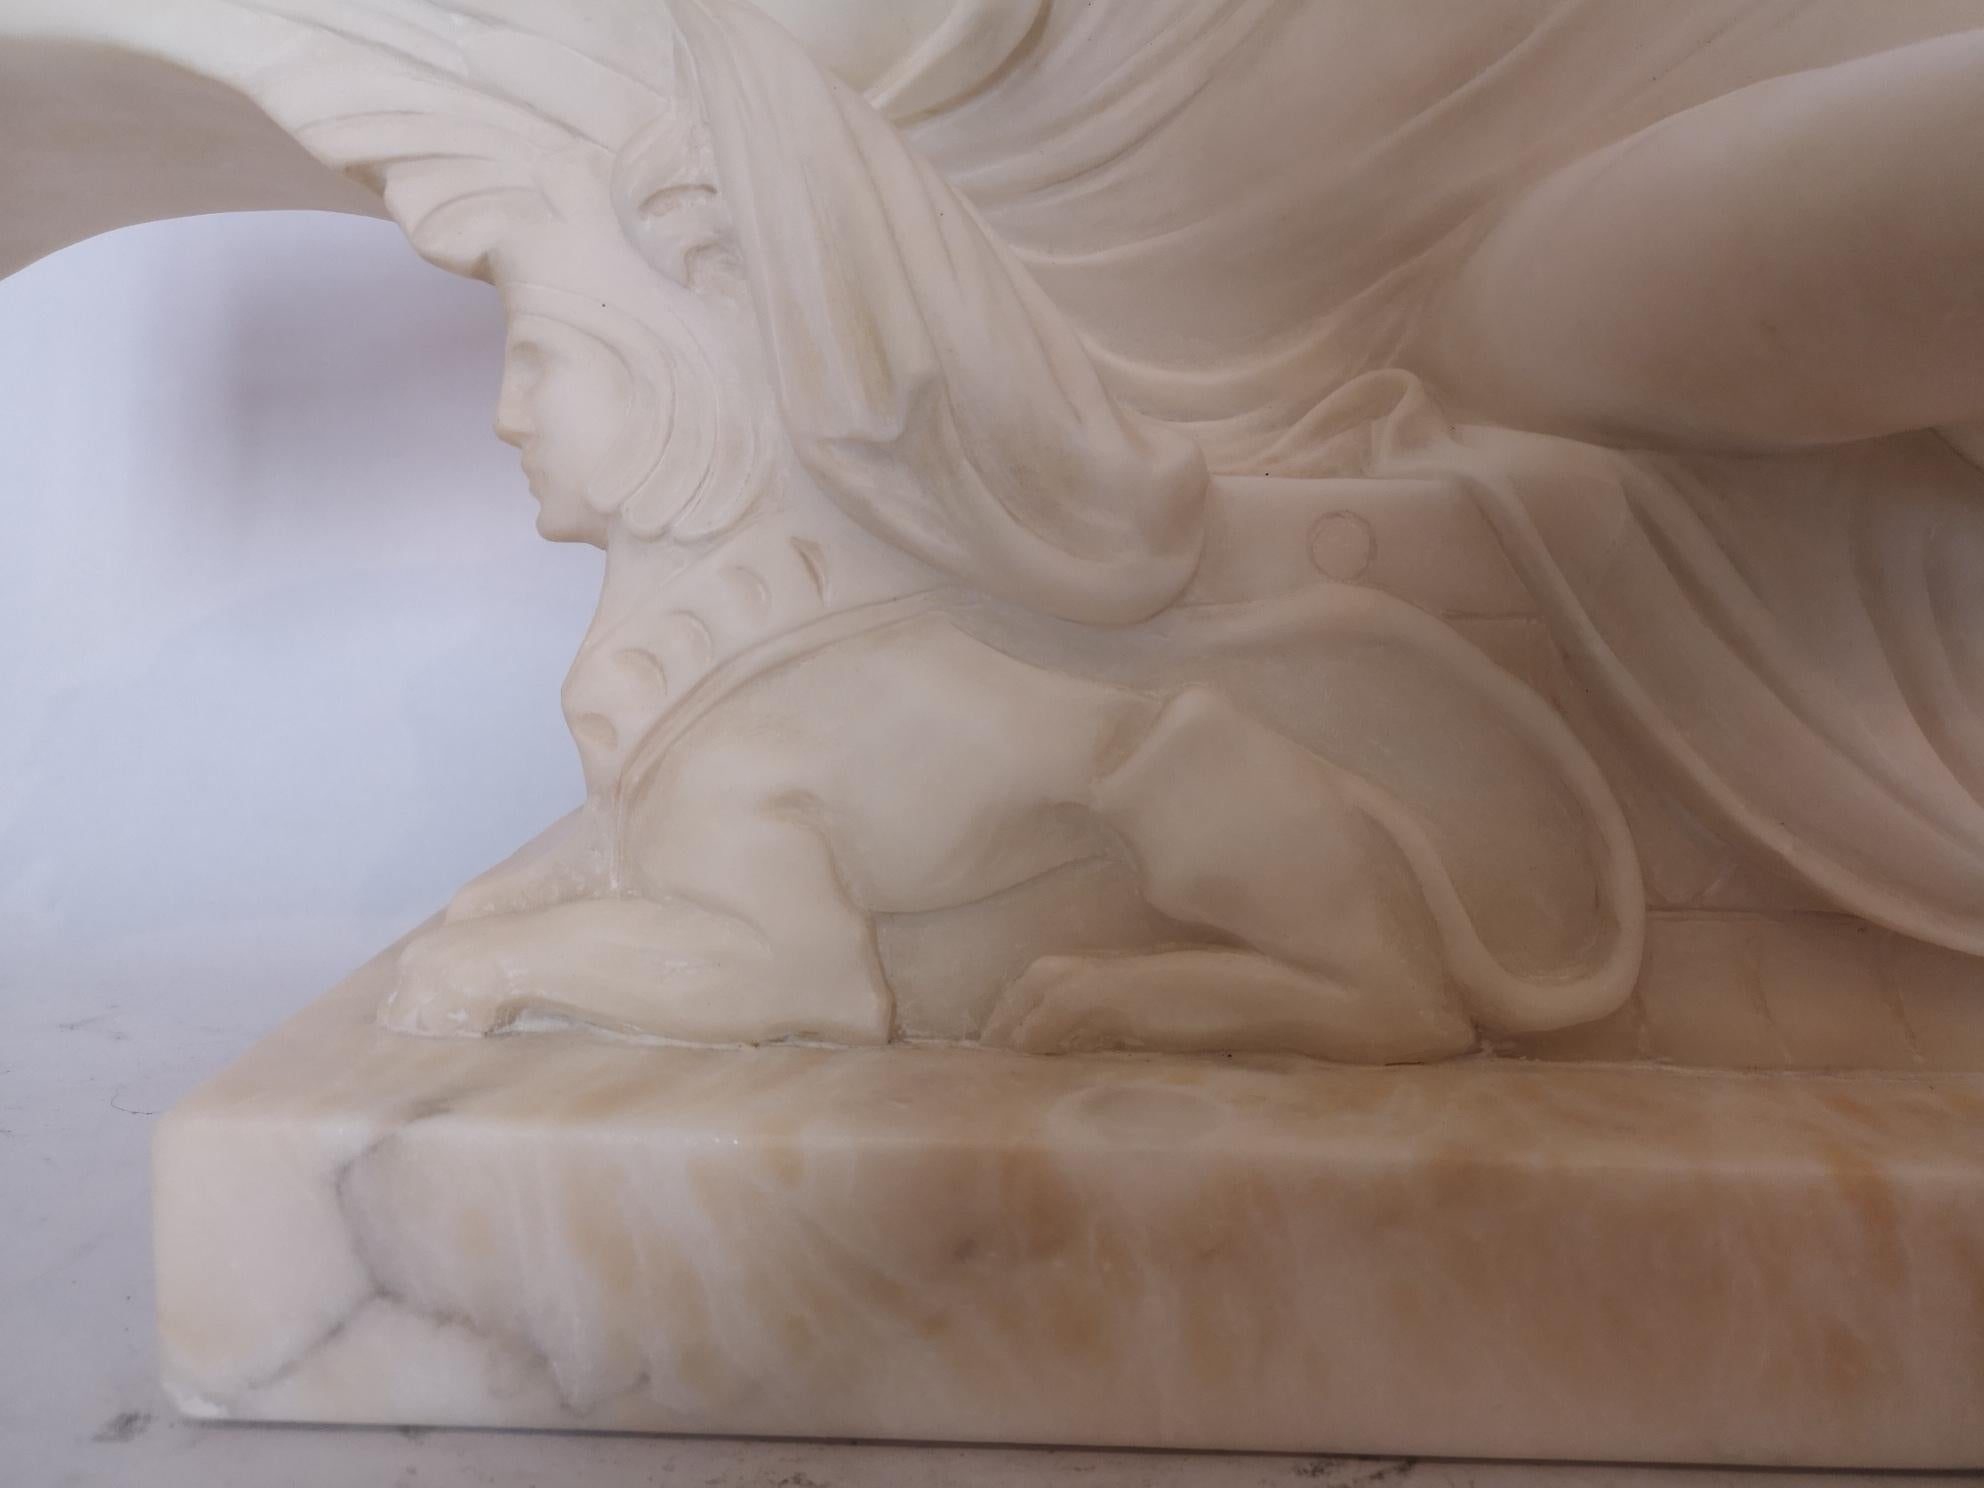 A very stylish marble sculpture by Italian artist Cipriani. The reclining Egyptian lady with a stylized Sphinx carved into the frieze.
Signed to the back Cipriani
Italian, circa 1920.